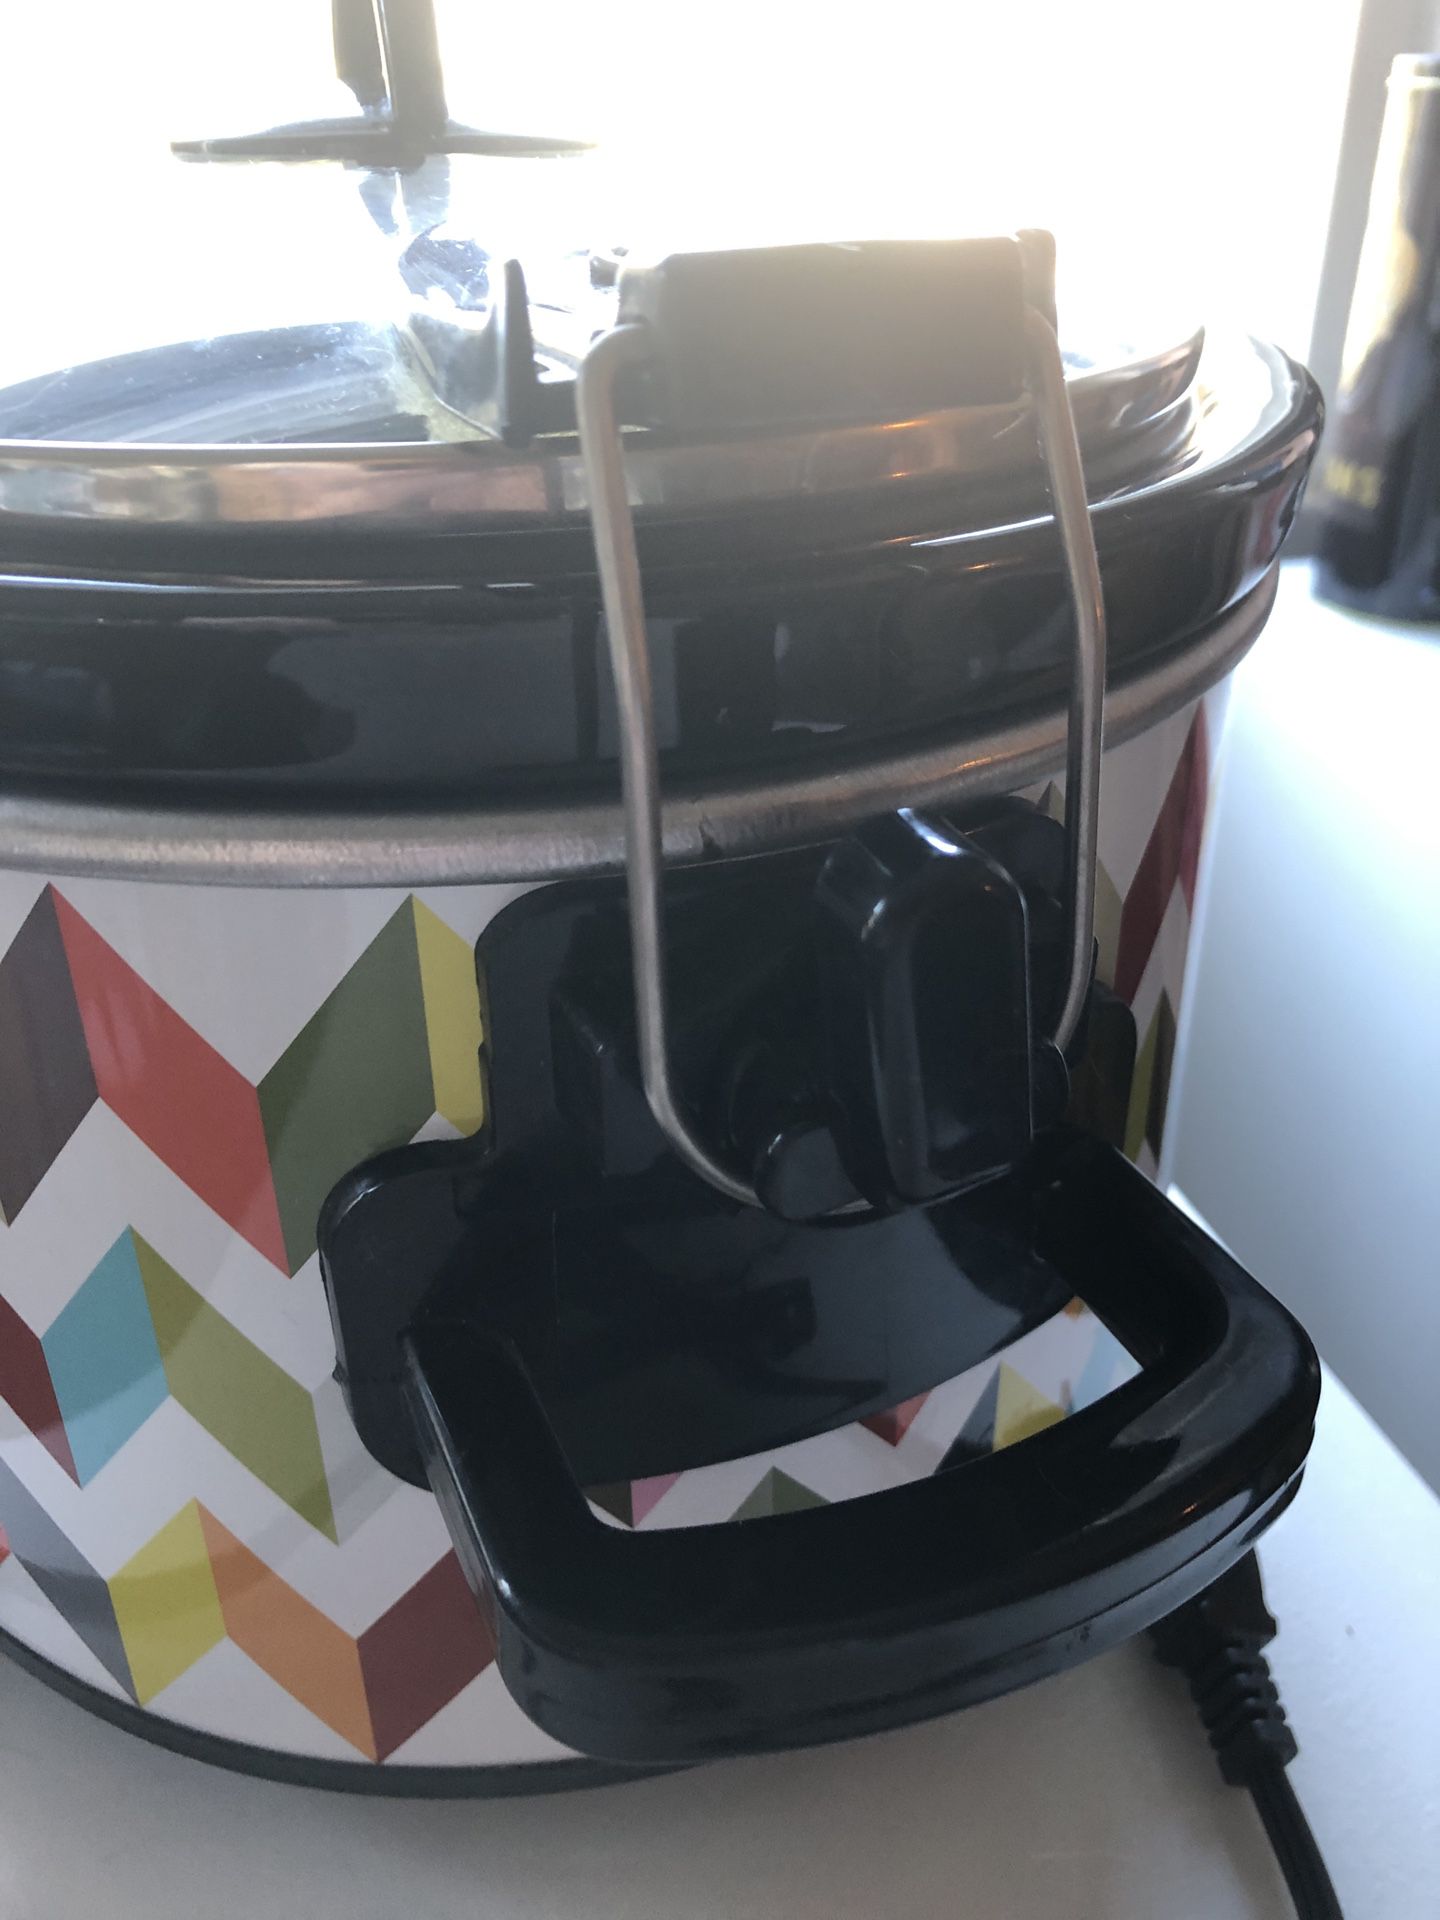 Cooks 5-Qt. Programmable Latch and Travel Slow Cooker for Sale in Redlands,  CA - OfferUp